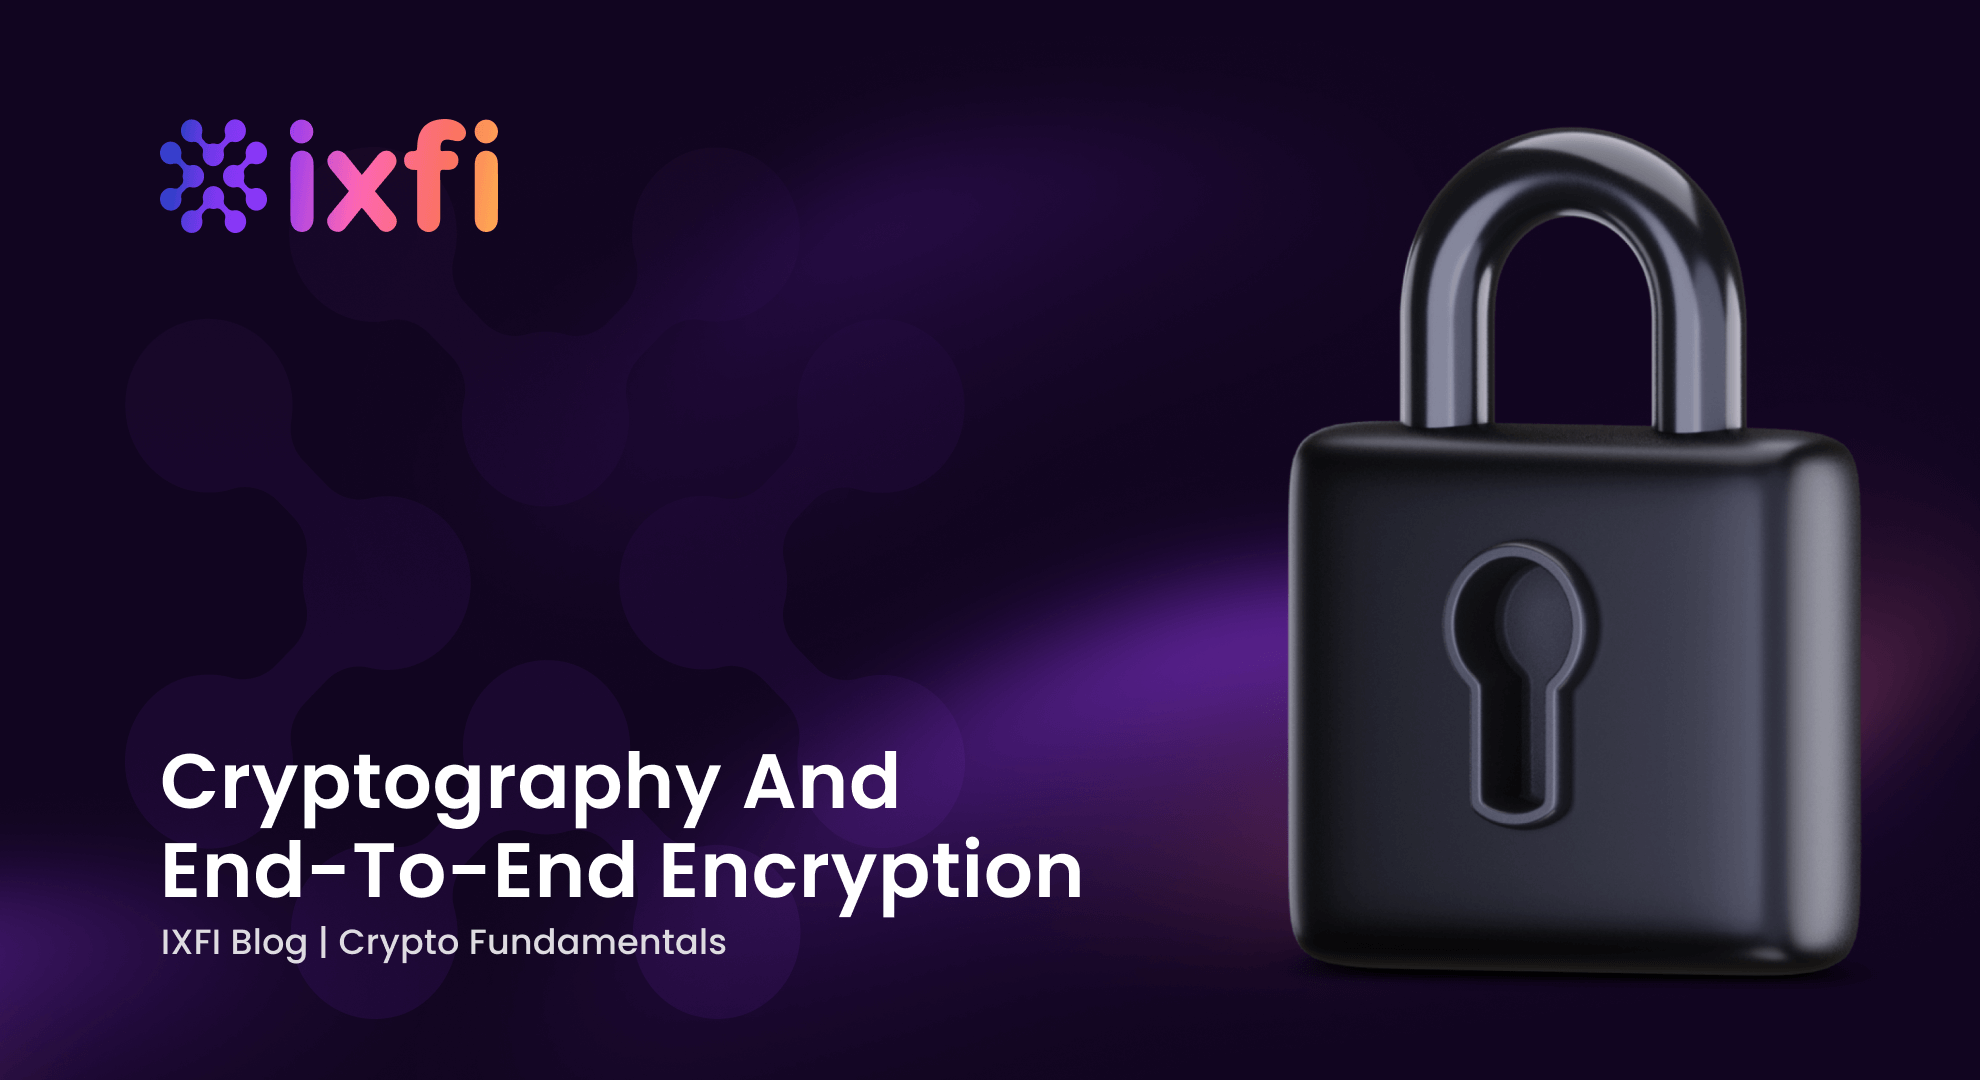 Cryptography and End-to-End Encryption